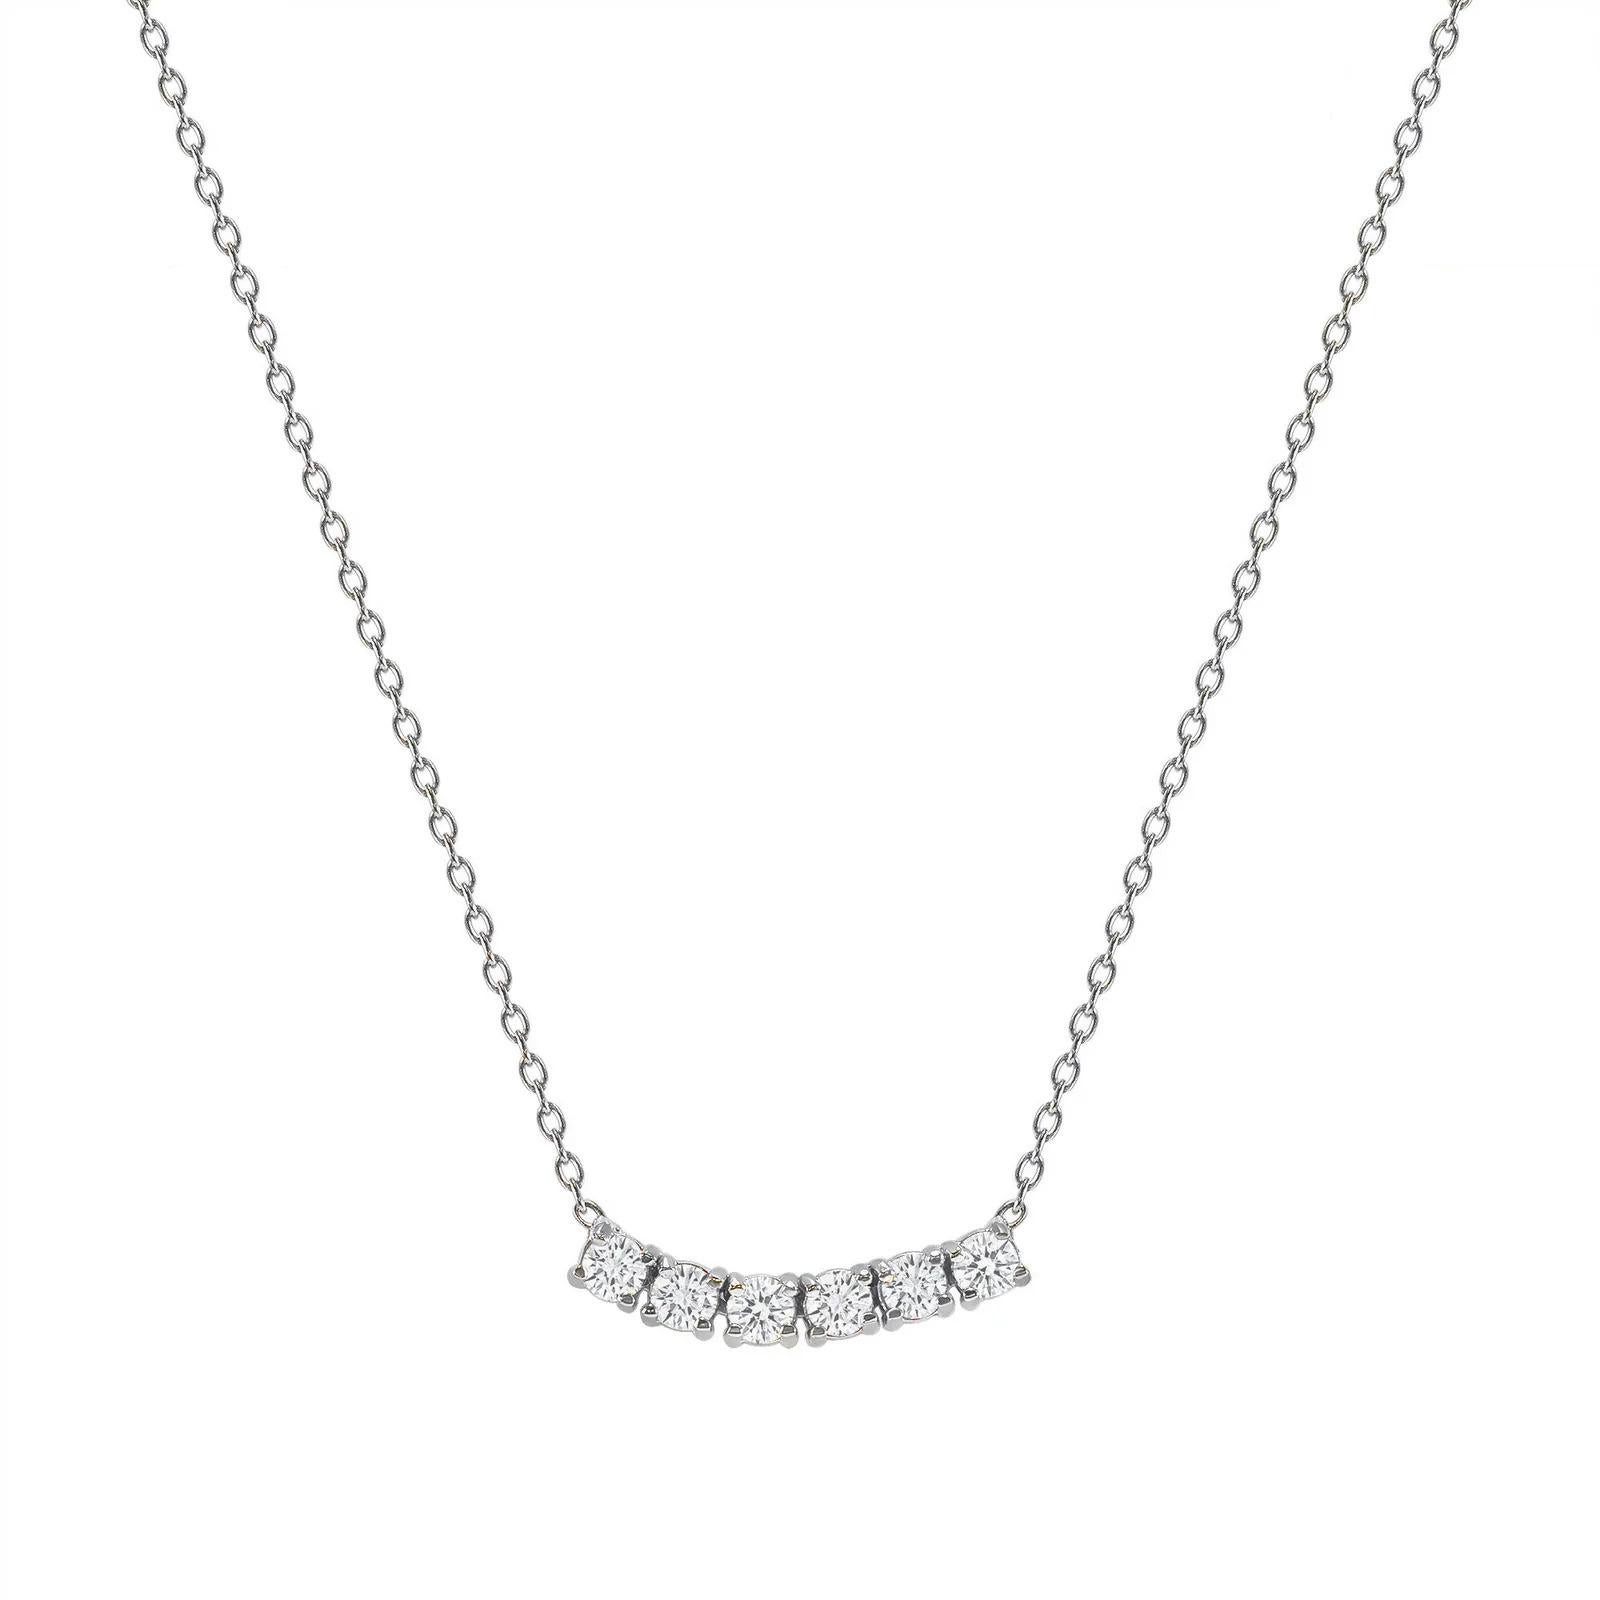 This petite, curved diamond necklace is crafted with gorgeous 14k gold set with six round diamonds.  

Gold: 14k 
Diamond Total Carats: 1ct
Diamond Cut: Round (6 diamonds)
Diamond Clarity: VS
Diamond Color: F
Color: White Gold
Necklace Length: 24